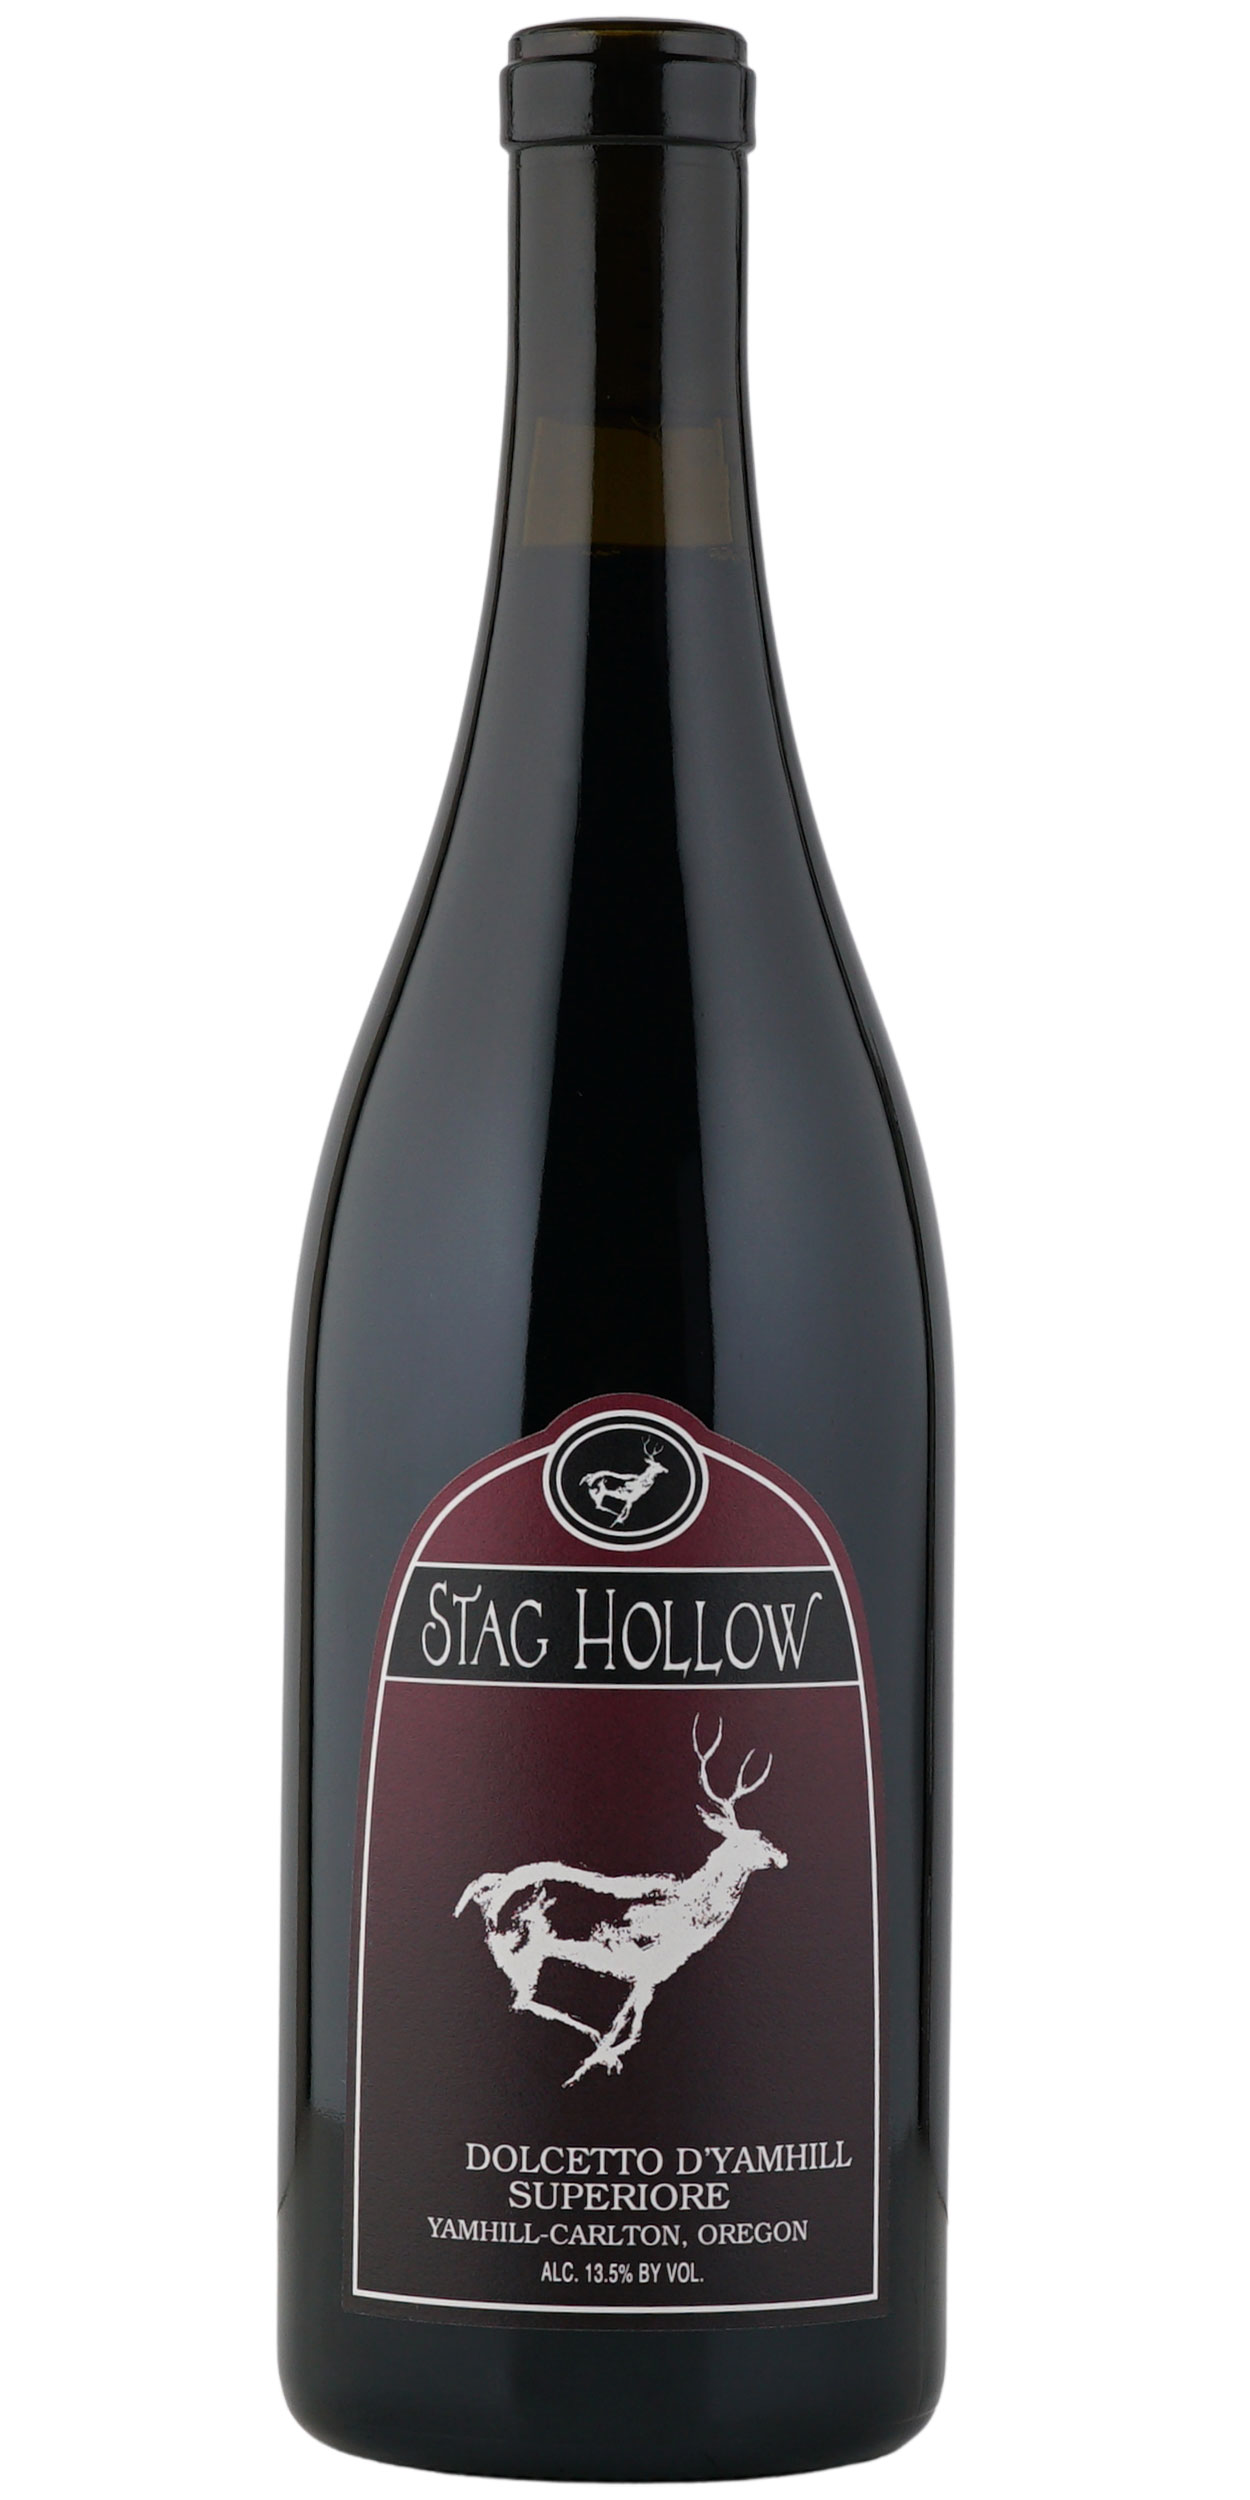 Bottle of Stag Hollow Dolcetto D'Yamhill Superiore